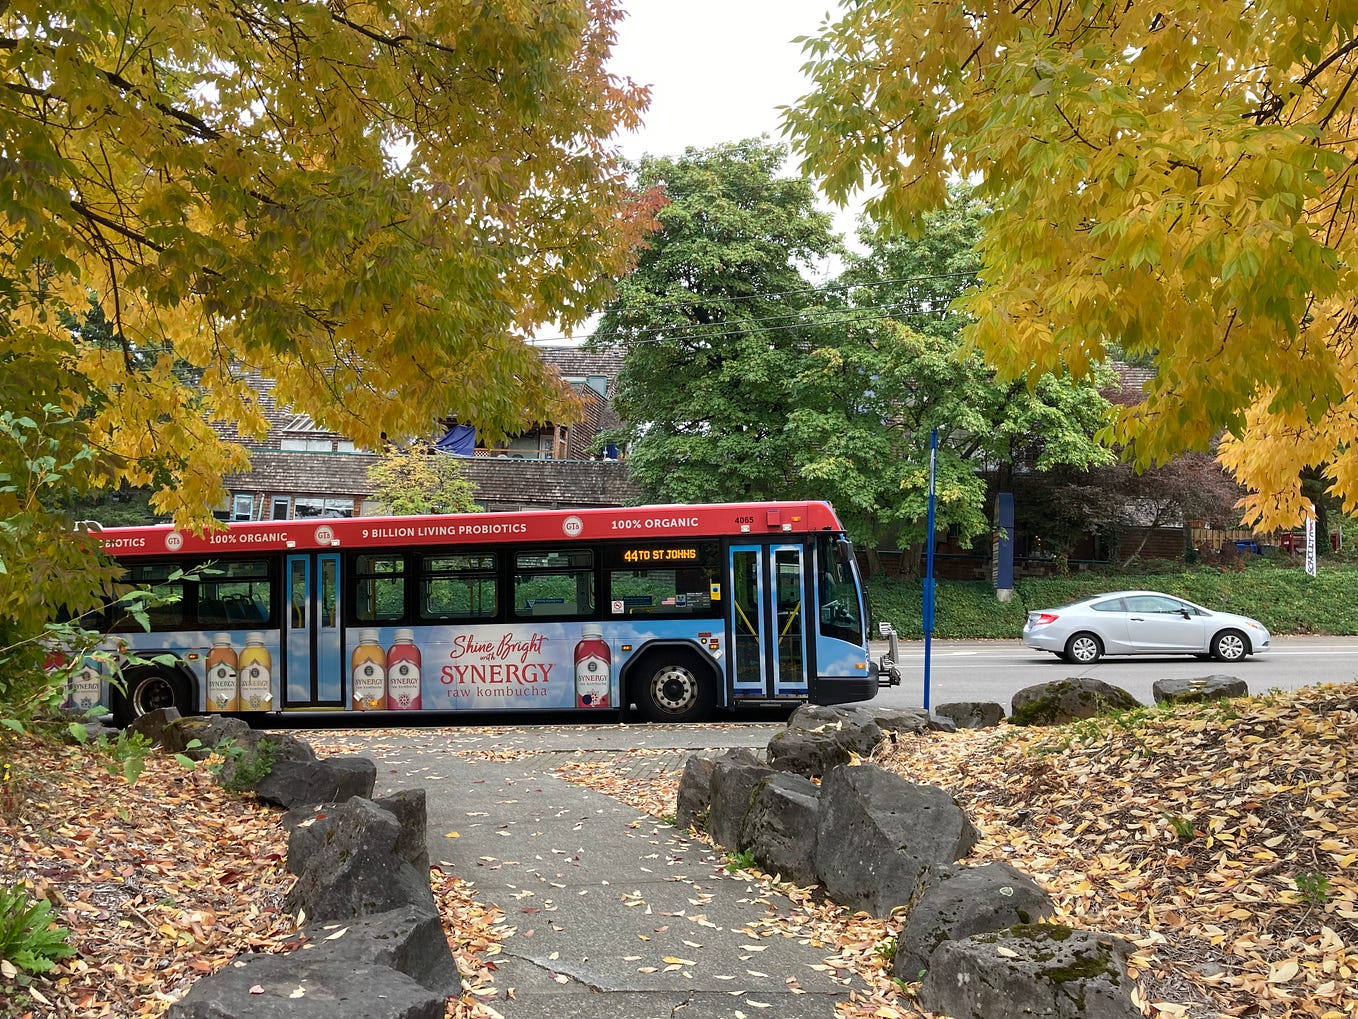 A TriMet bus with a Kombucha ad on the side of it framed by maple trees in yellow fall color leaves.